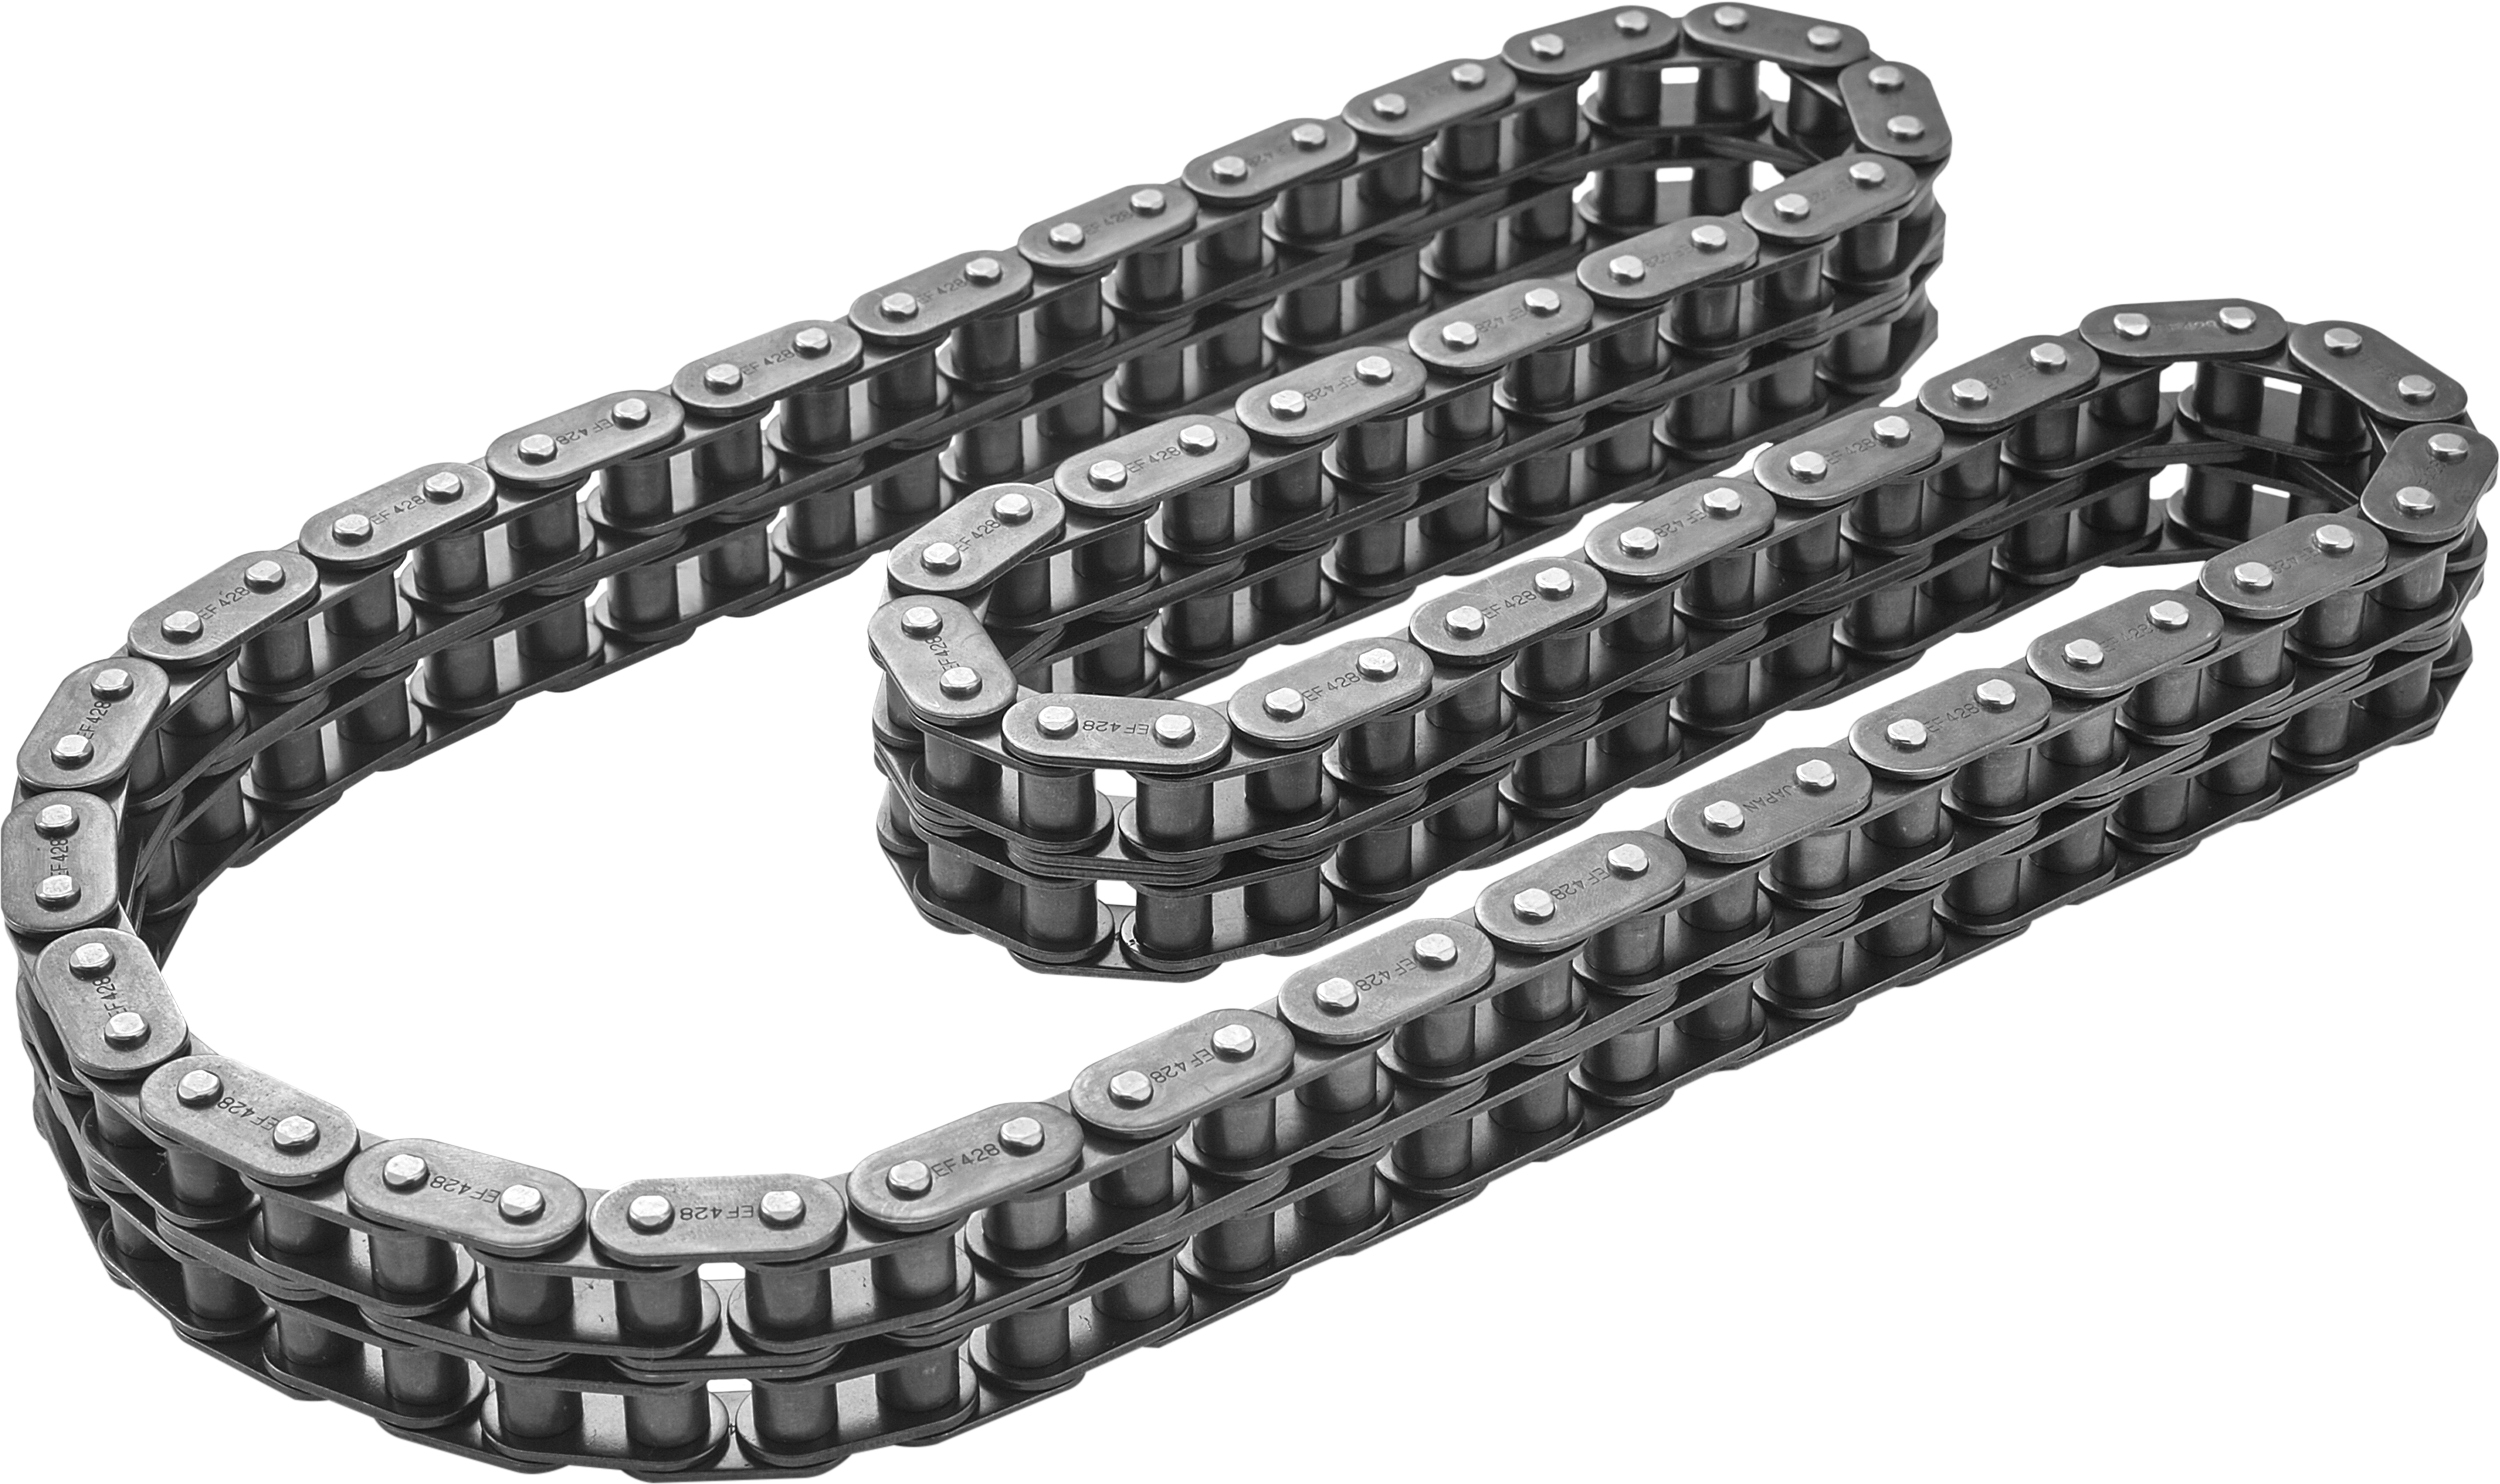 Harddrive - Double Row Primary Chain 82 Link Endless Oe# 40007-86 - 89479